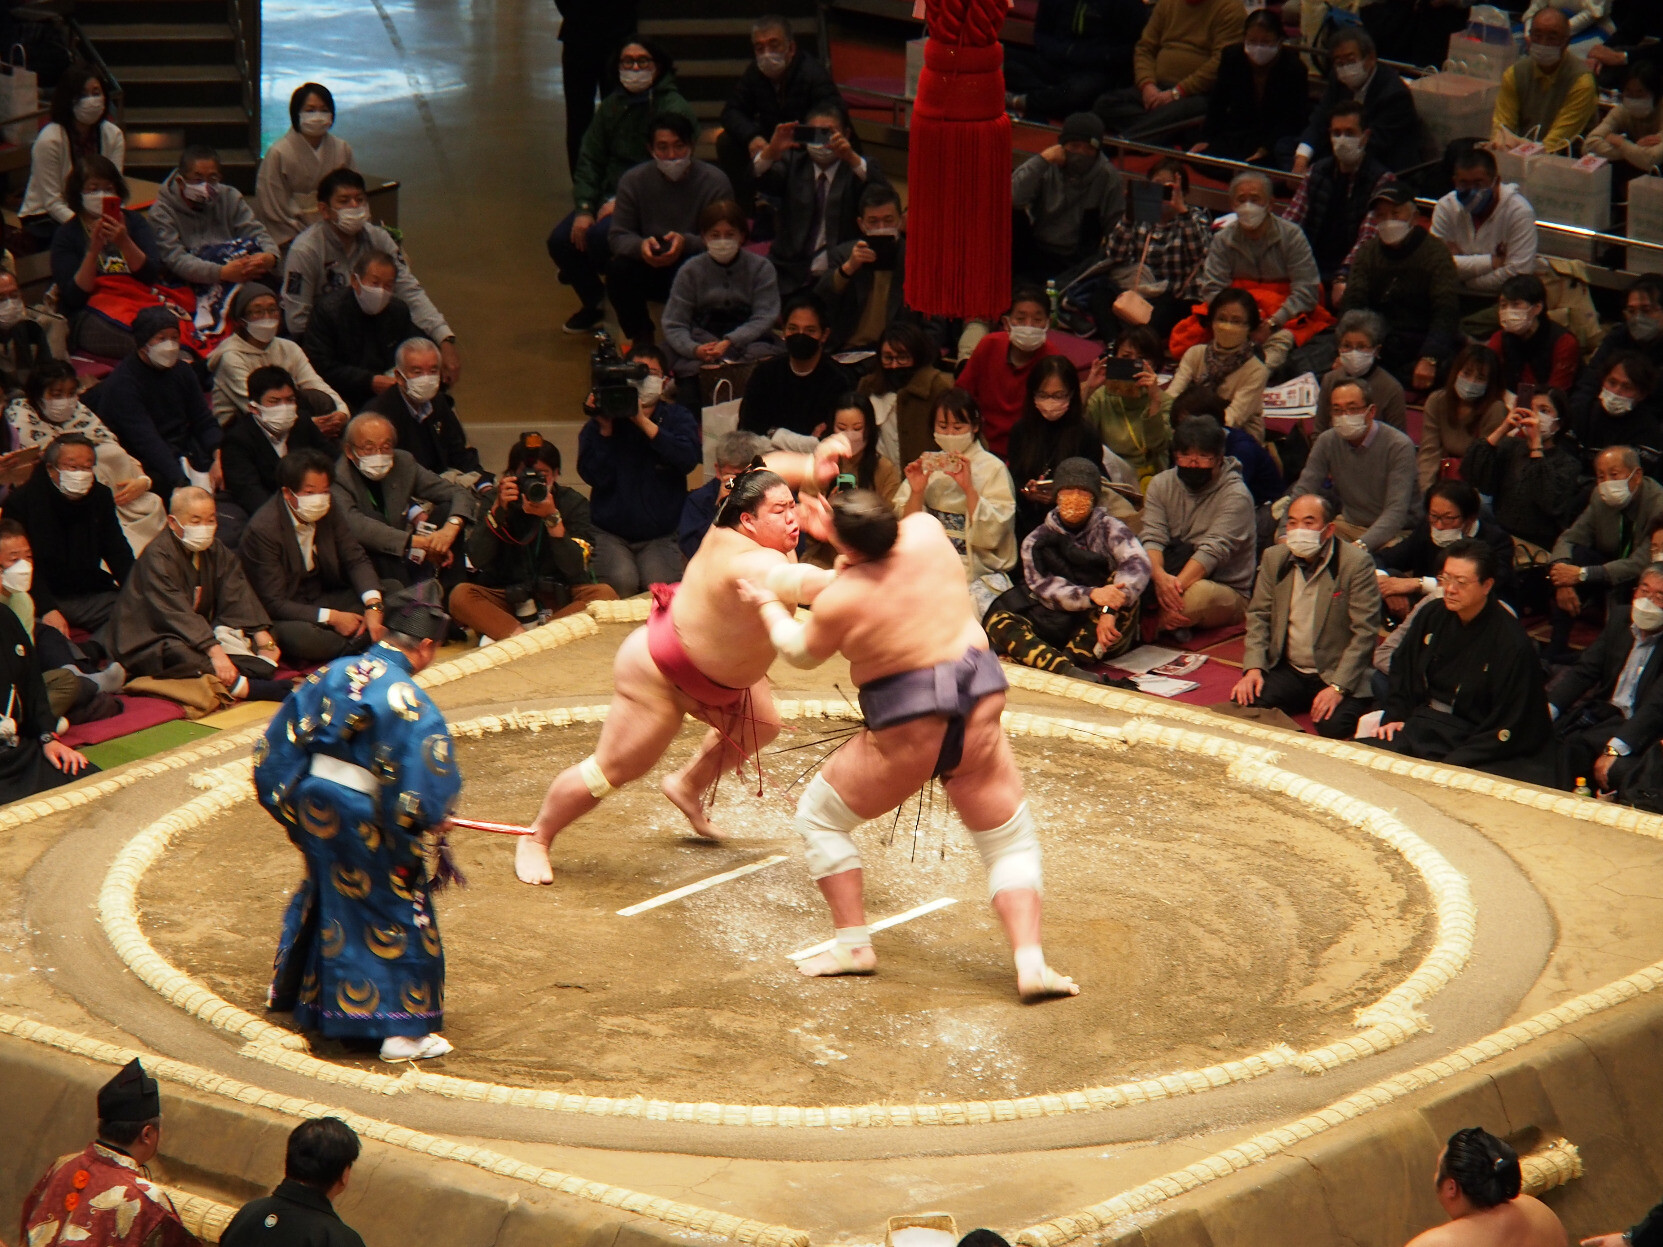 Two sumo wrestlers clash in the center of the ring as the judge and crowd watch intently.